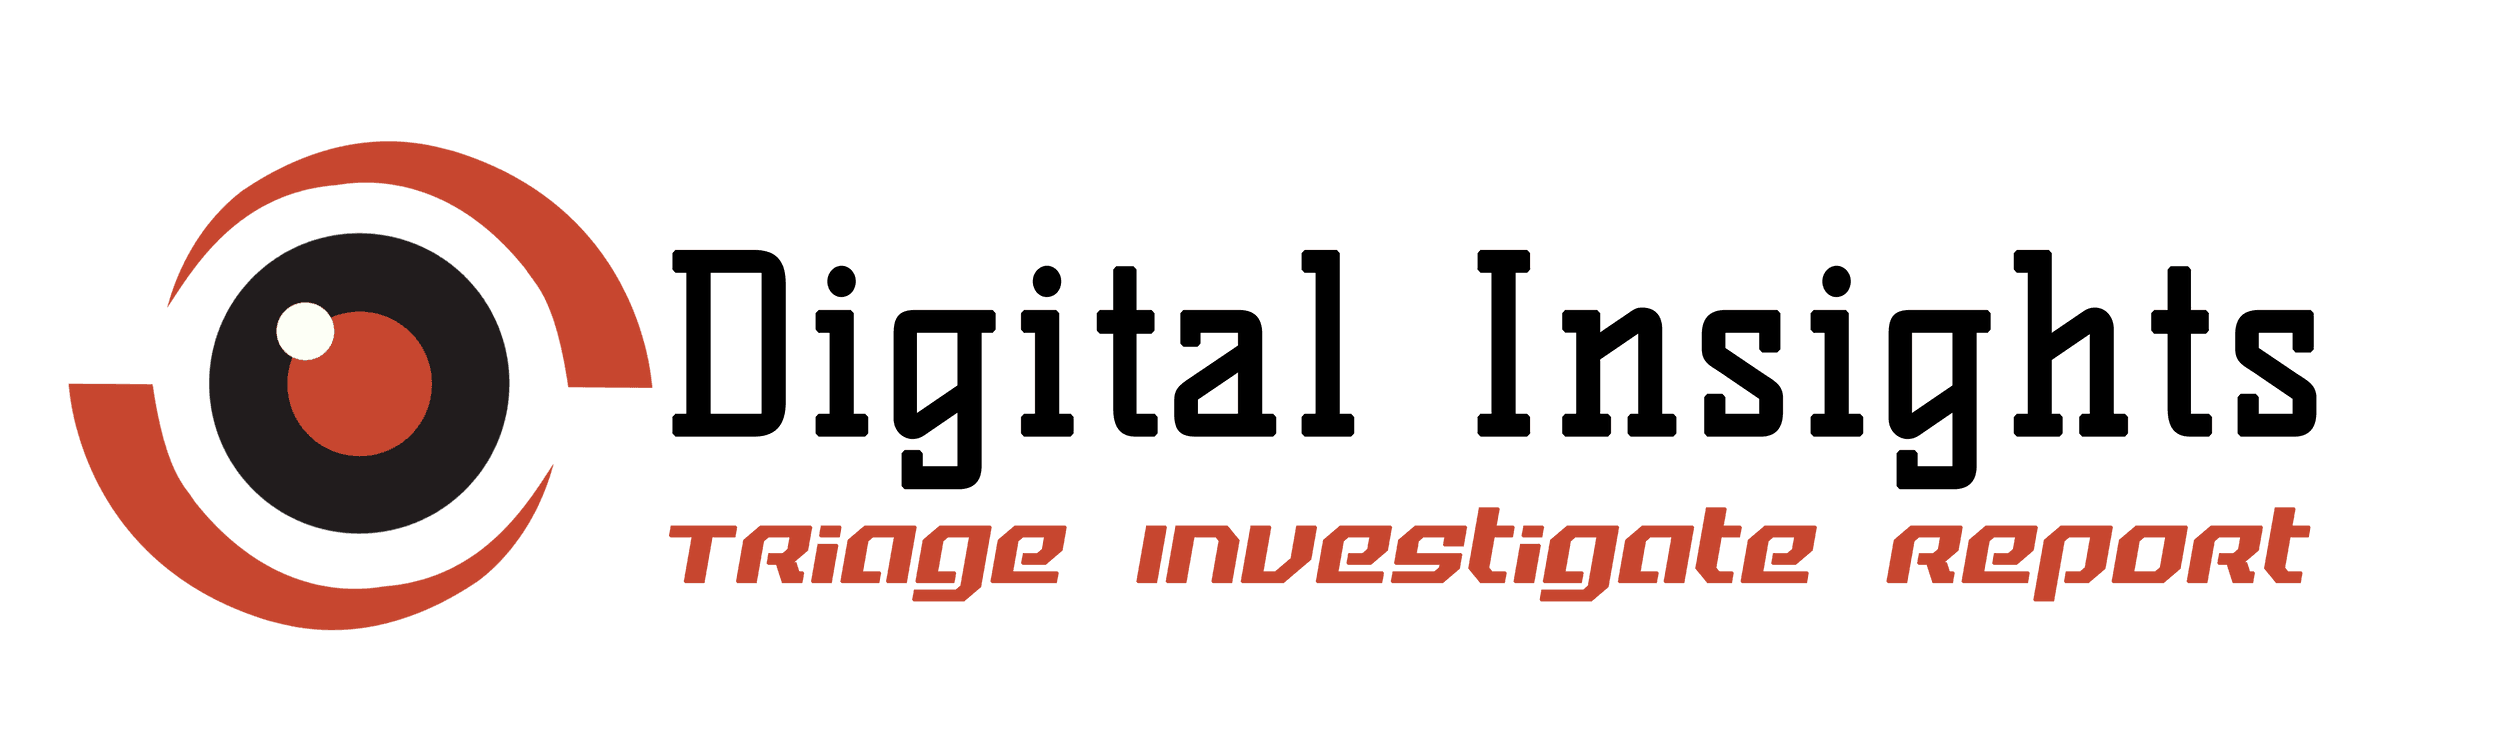 Product Services | Digital Insights UK image